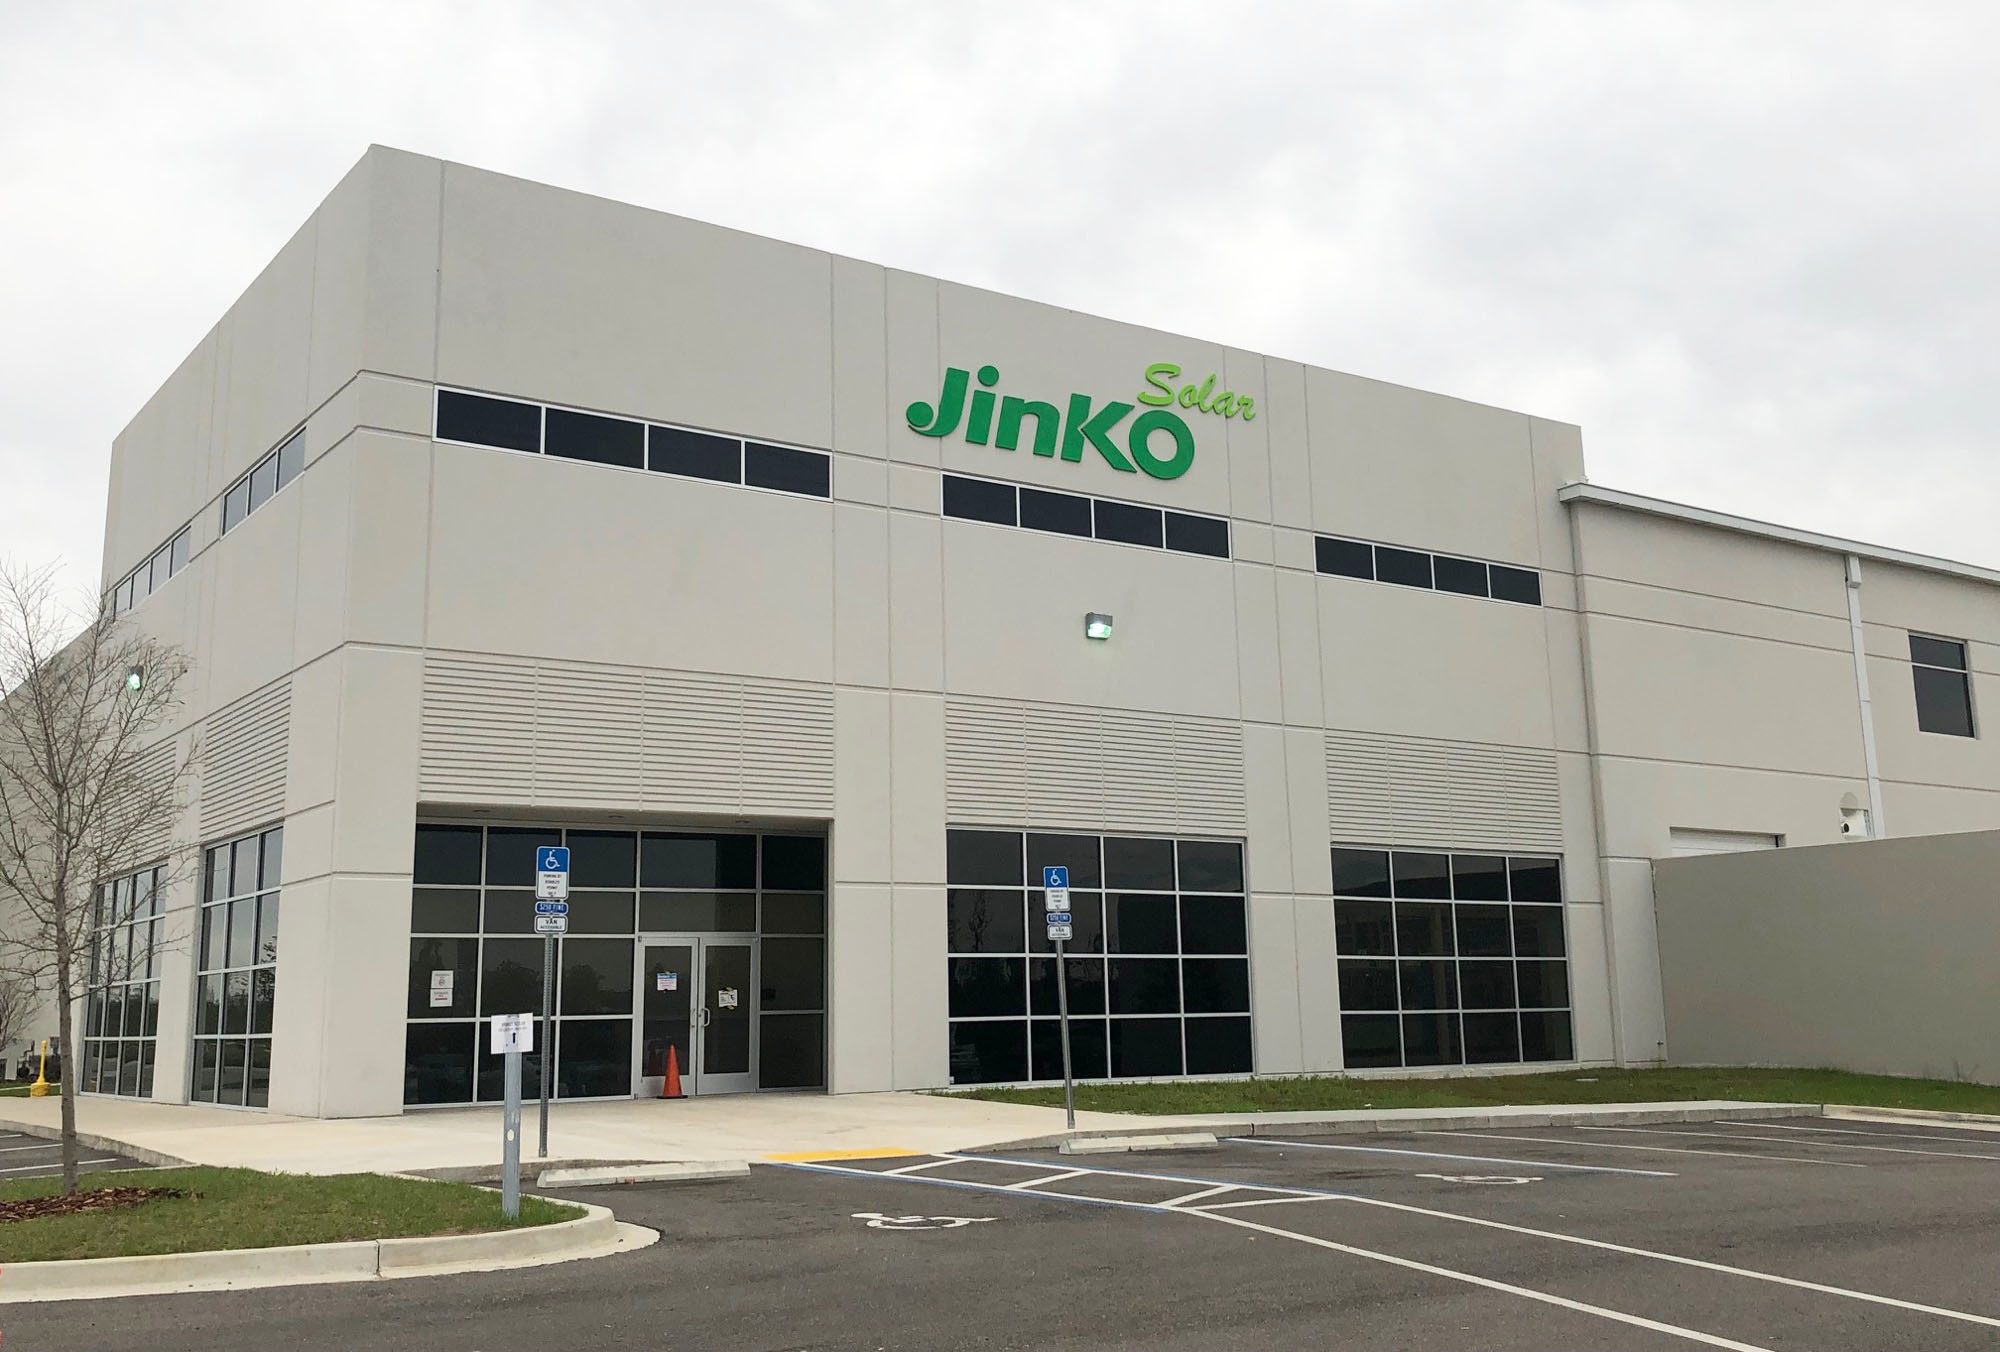 JinkoSolar employs 280 employees in Jacksonville to turn out about 100 photovoltaic modules an hour.